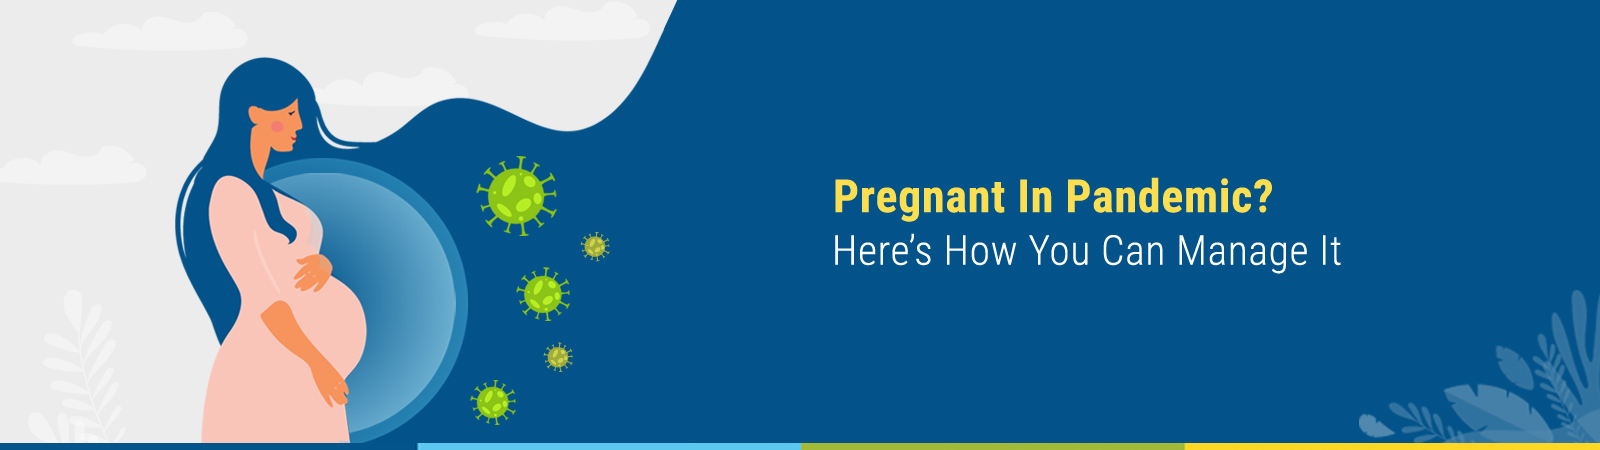 Pregnant In Pandemic? Here’s How You Can Manage It